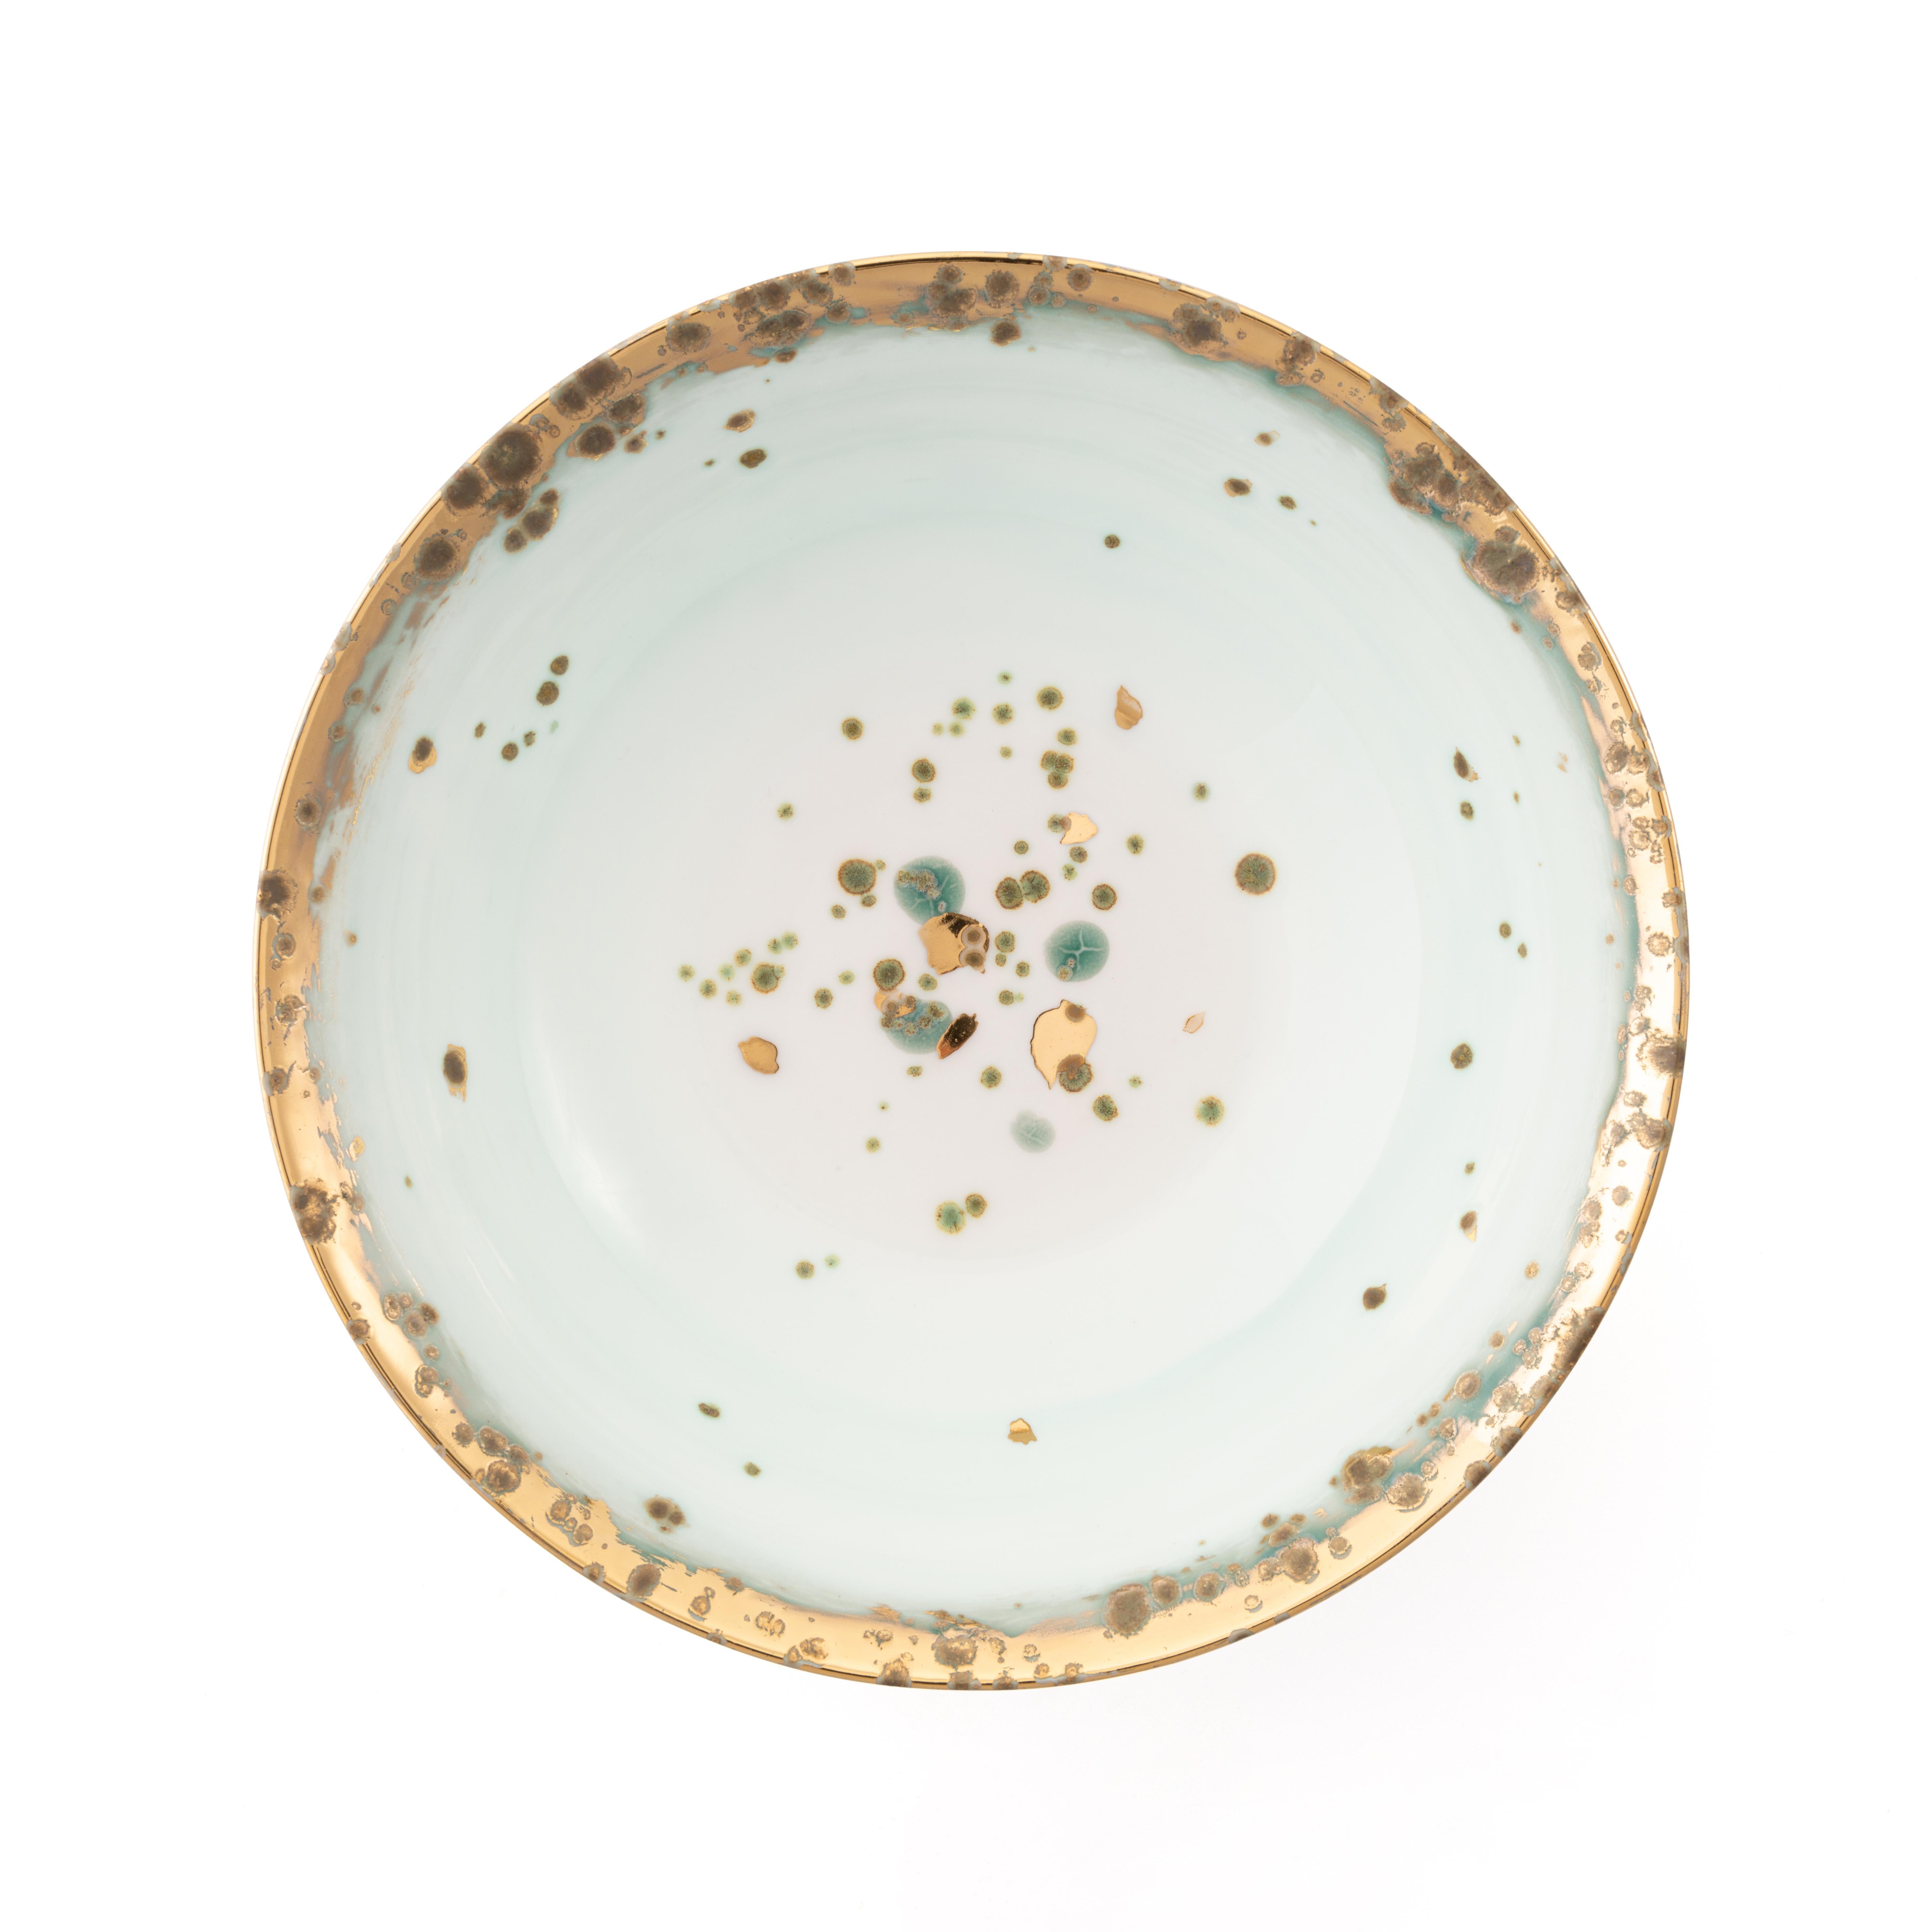 Hand painted in Italy from the finest porcelain, this Michelangelo salad bowl is material and earthy, like the great Renaissance Master's work. It conveys classical beauty and elegance. The green enameled shade fades as it moves away from the rim